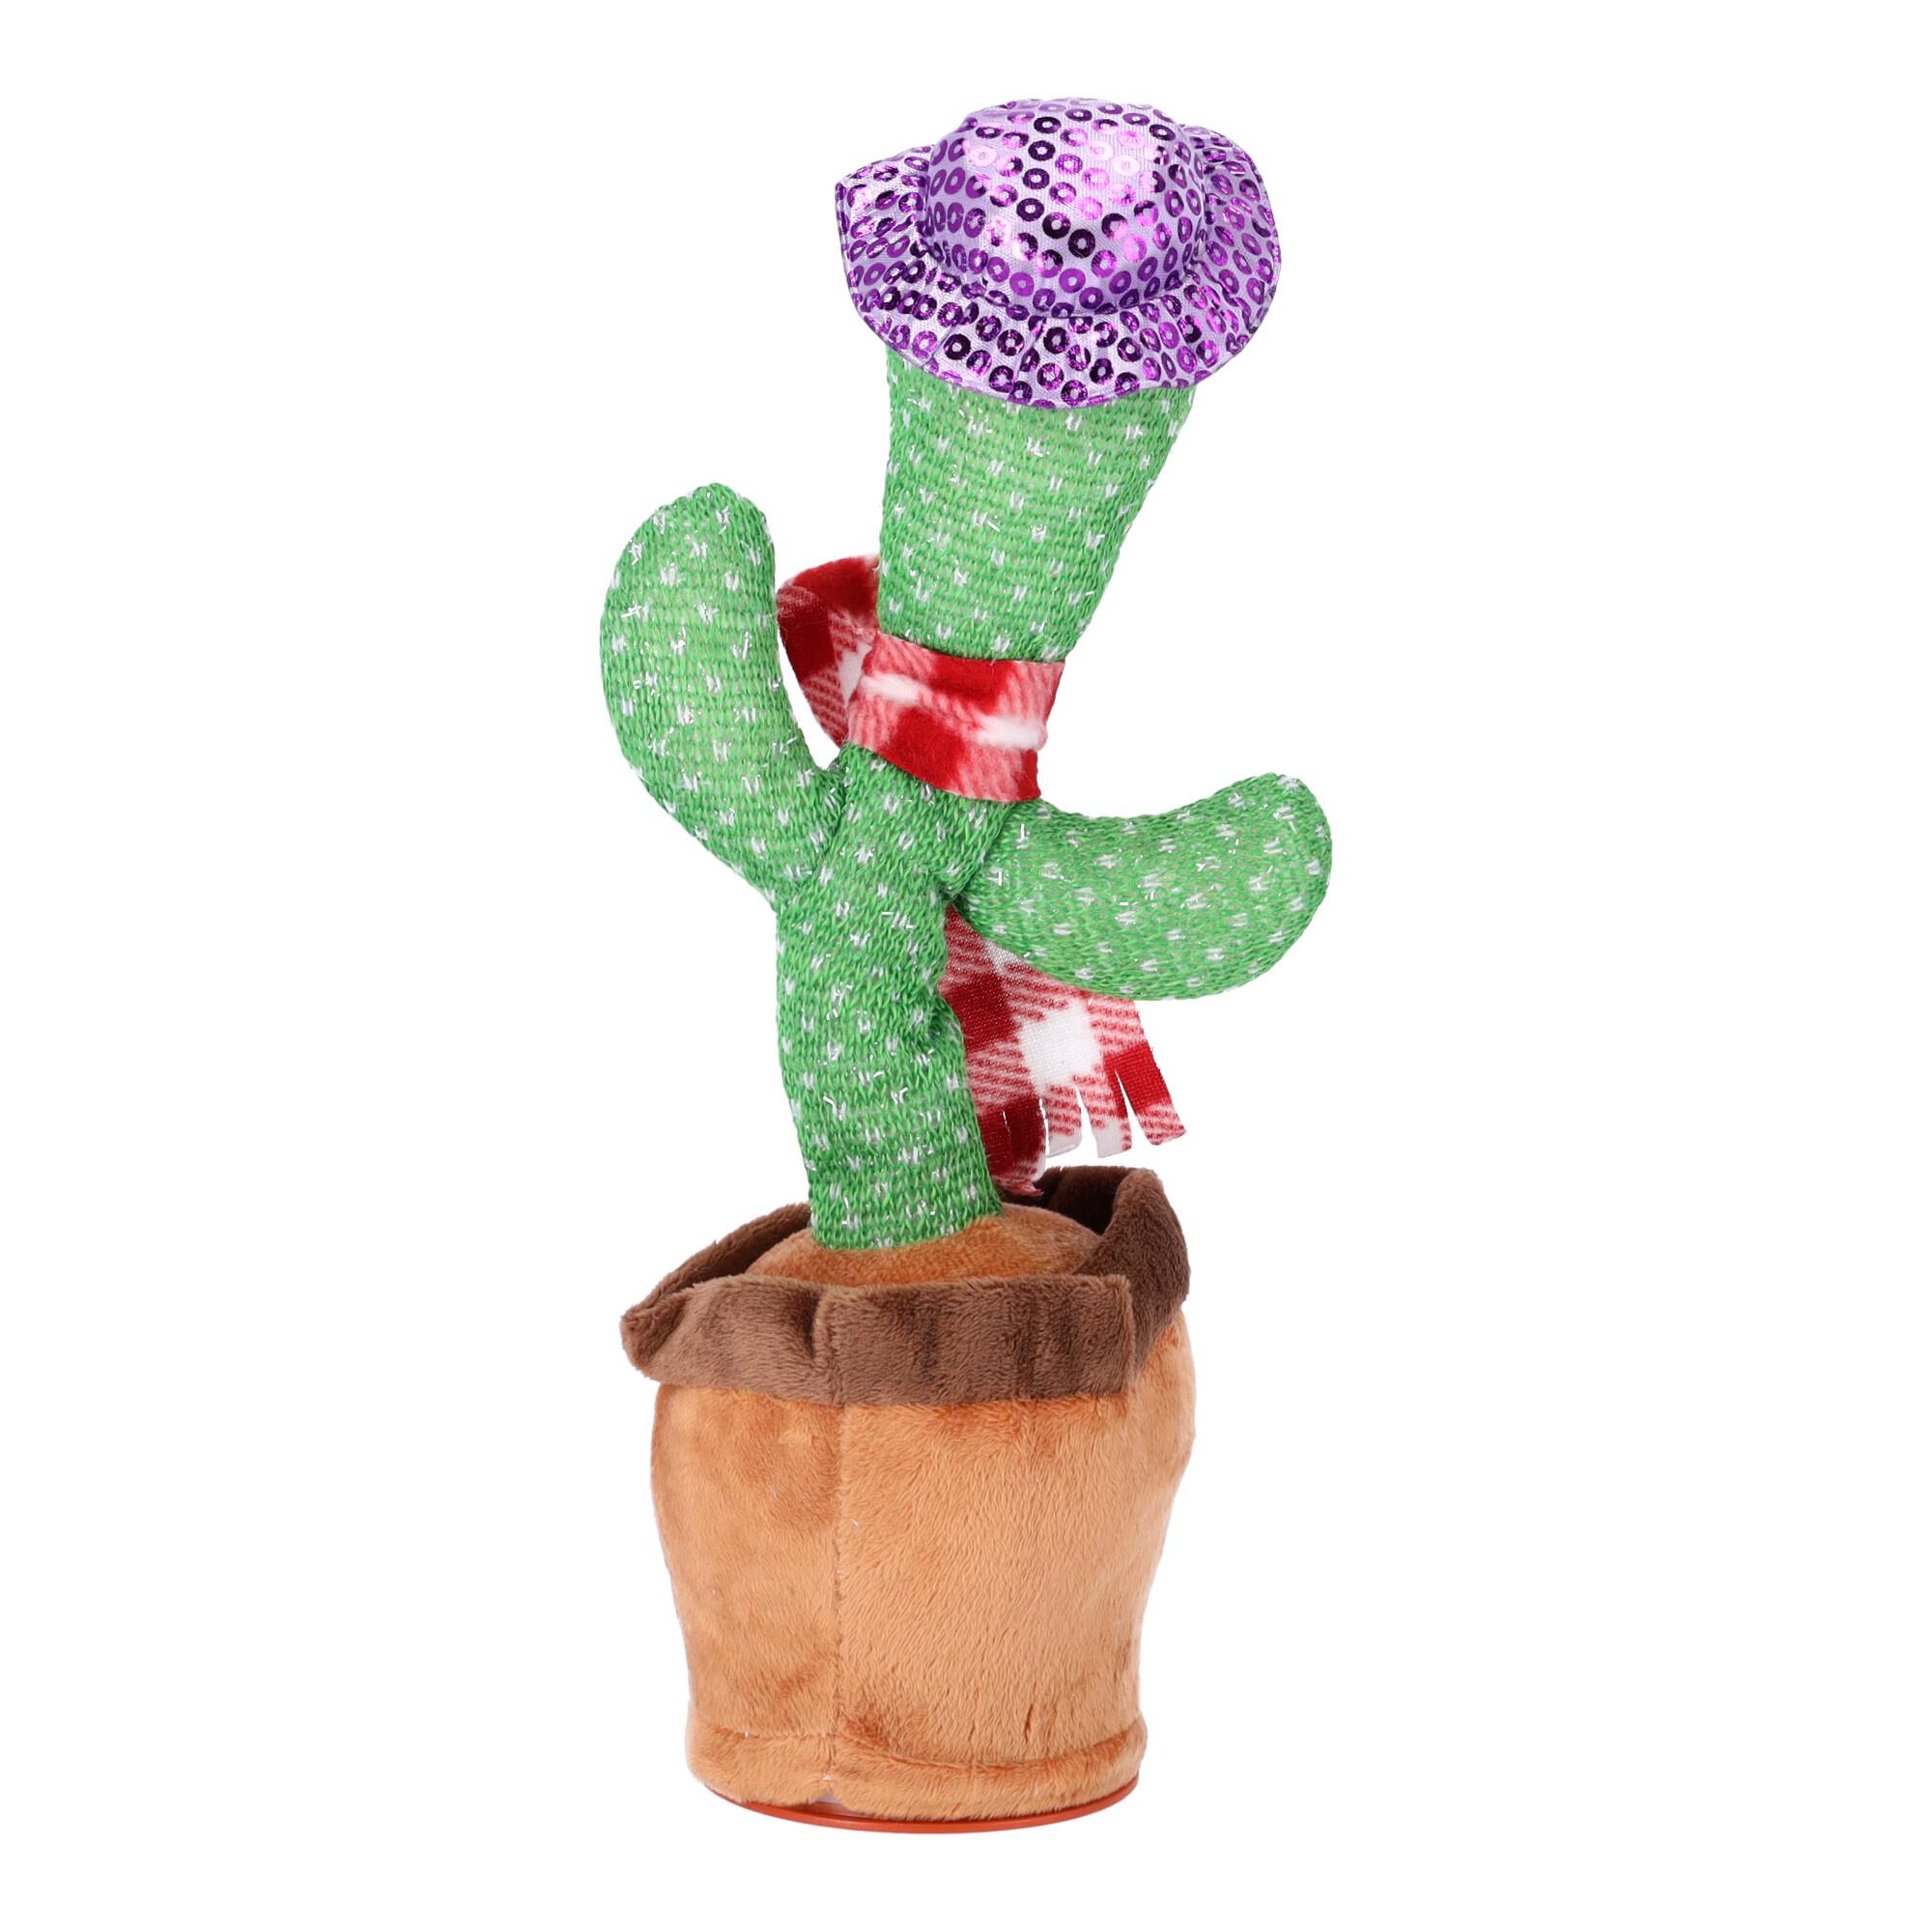 Children's toy - Dancing cactus - with red checkered scarf and purple hat